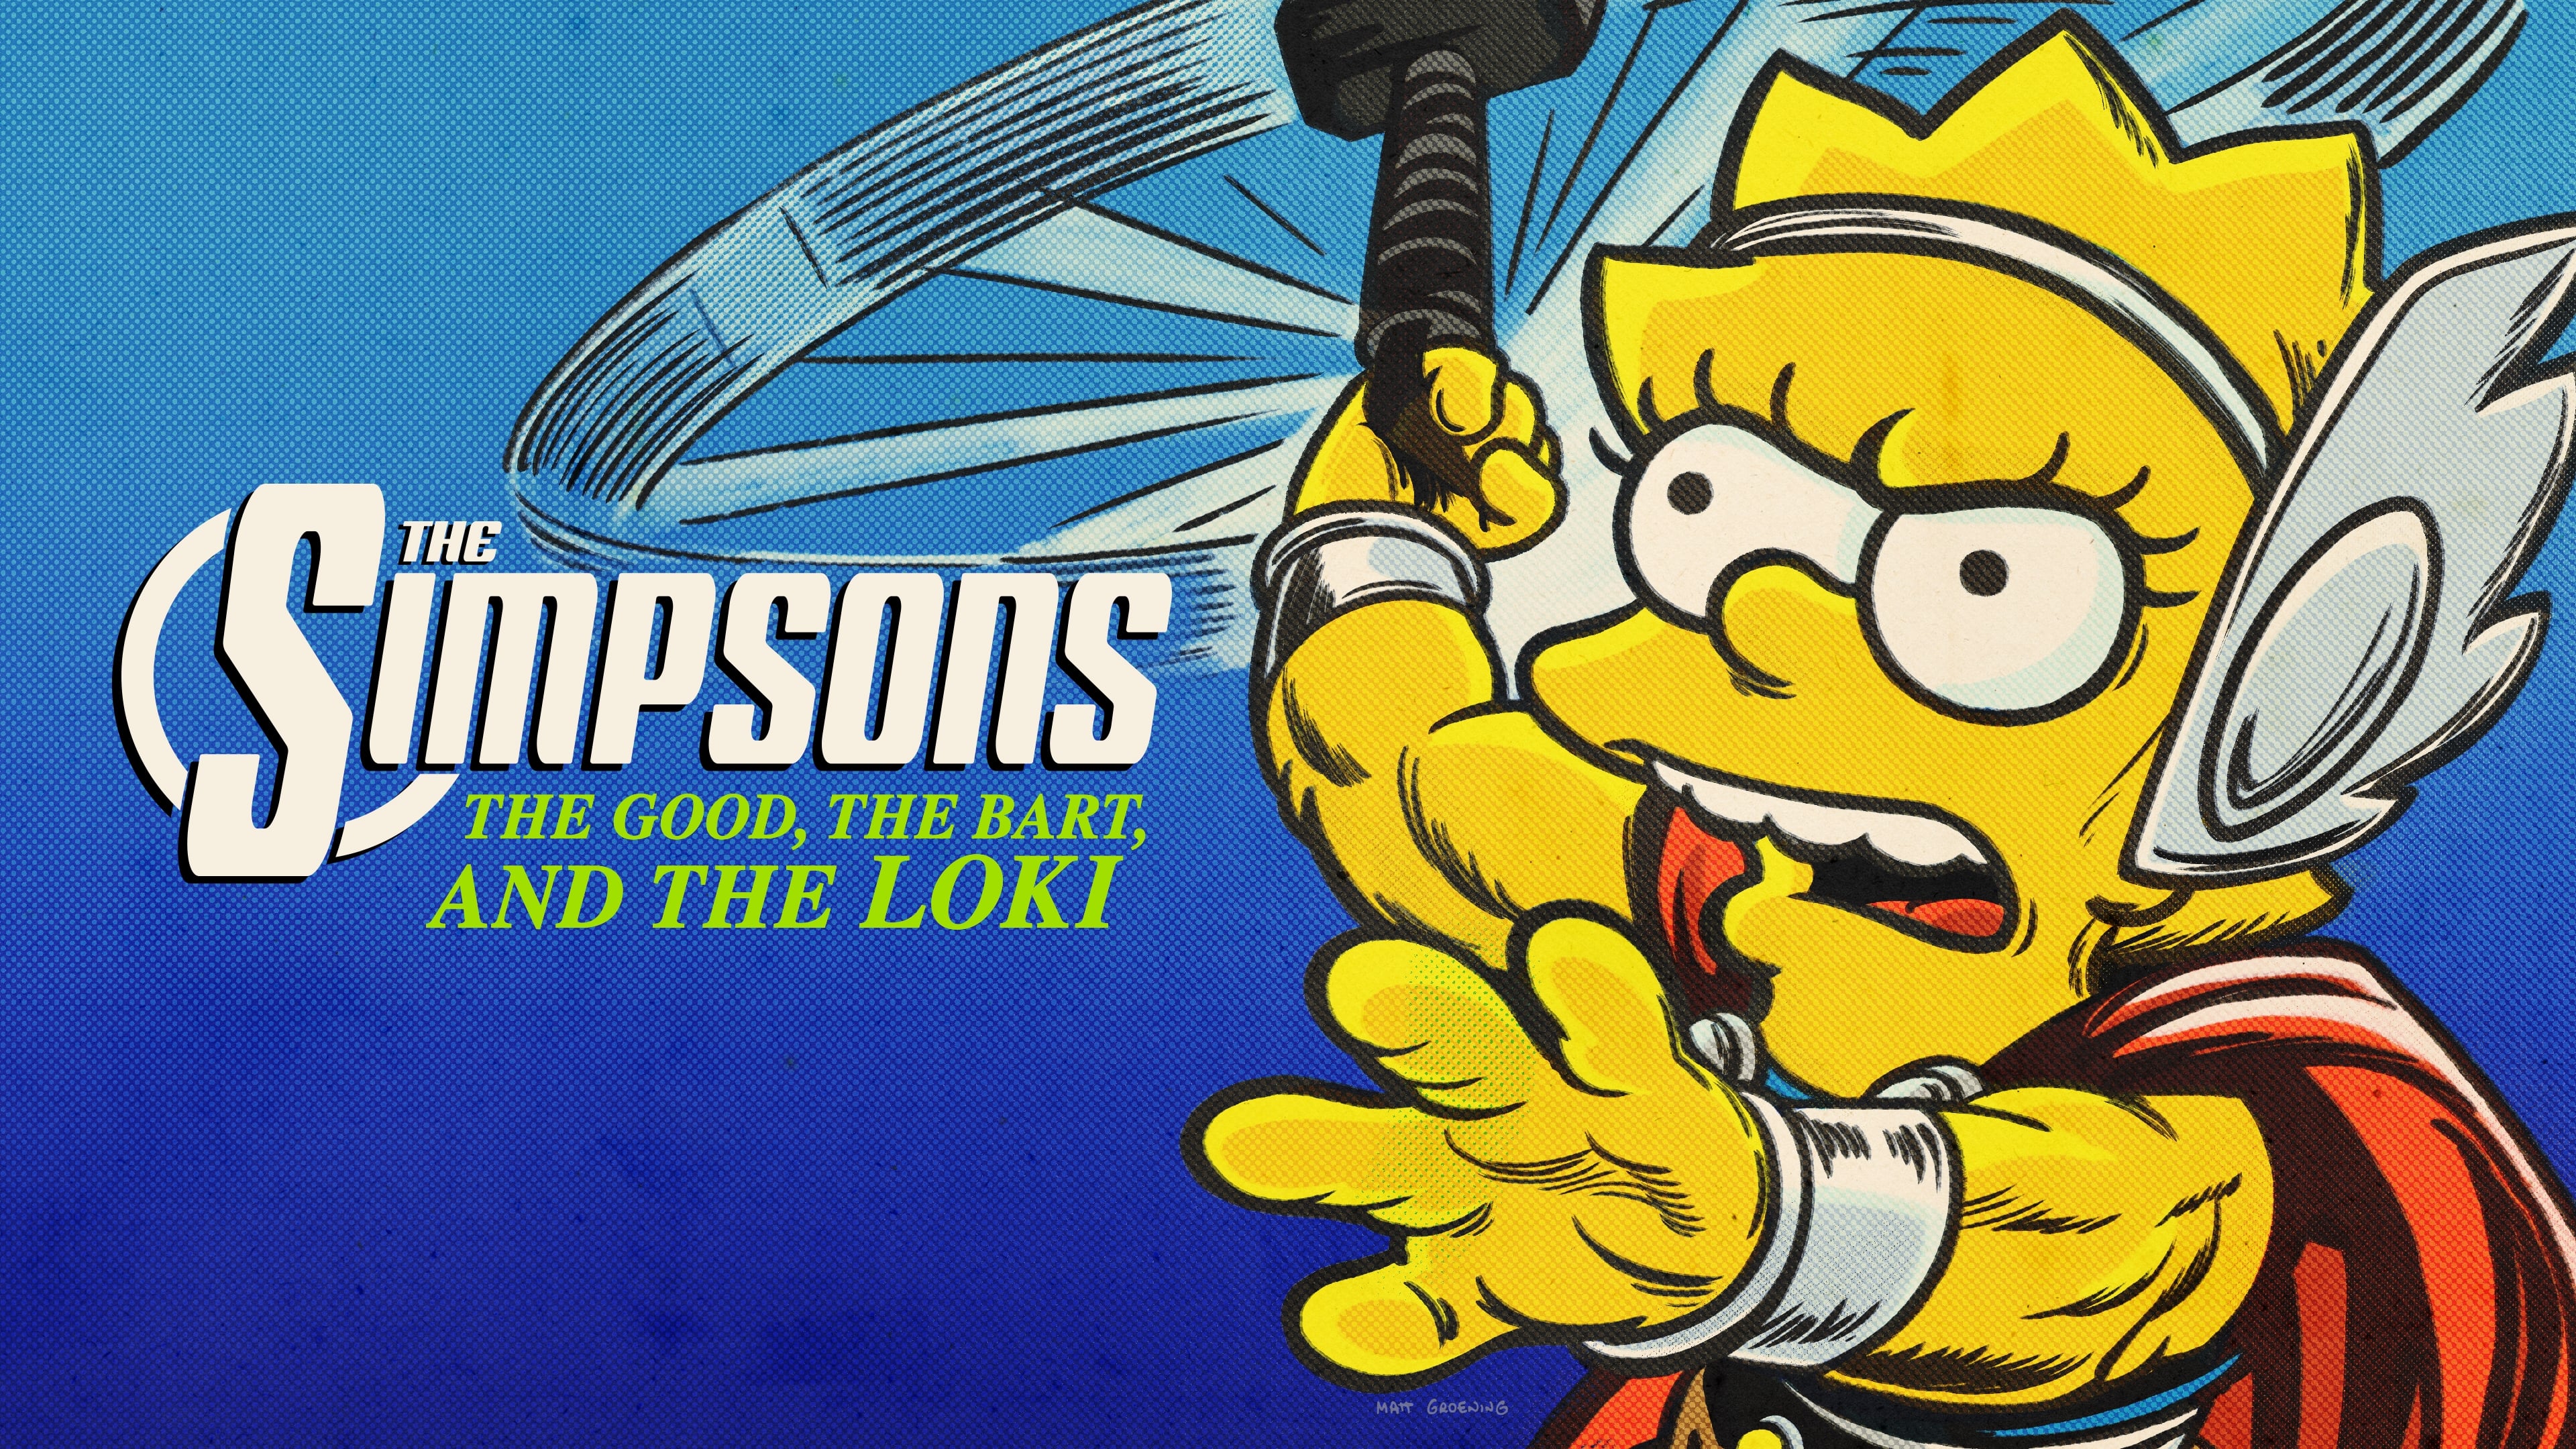 Movie The Good, The Bart, and The Loki HD Wallpaper | Background Image